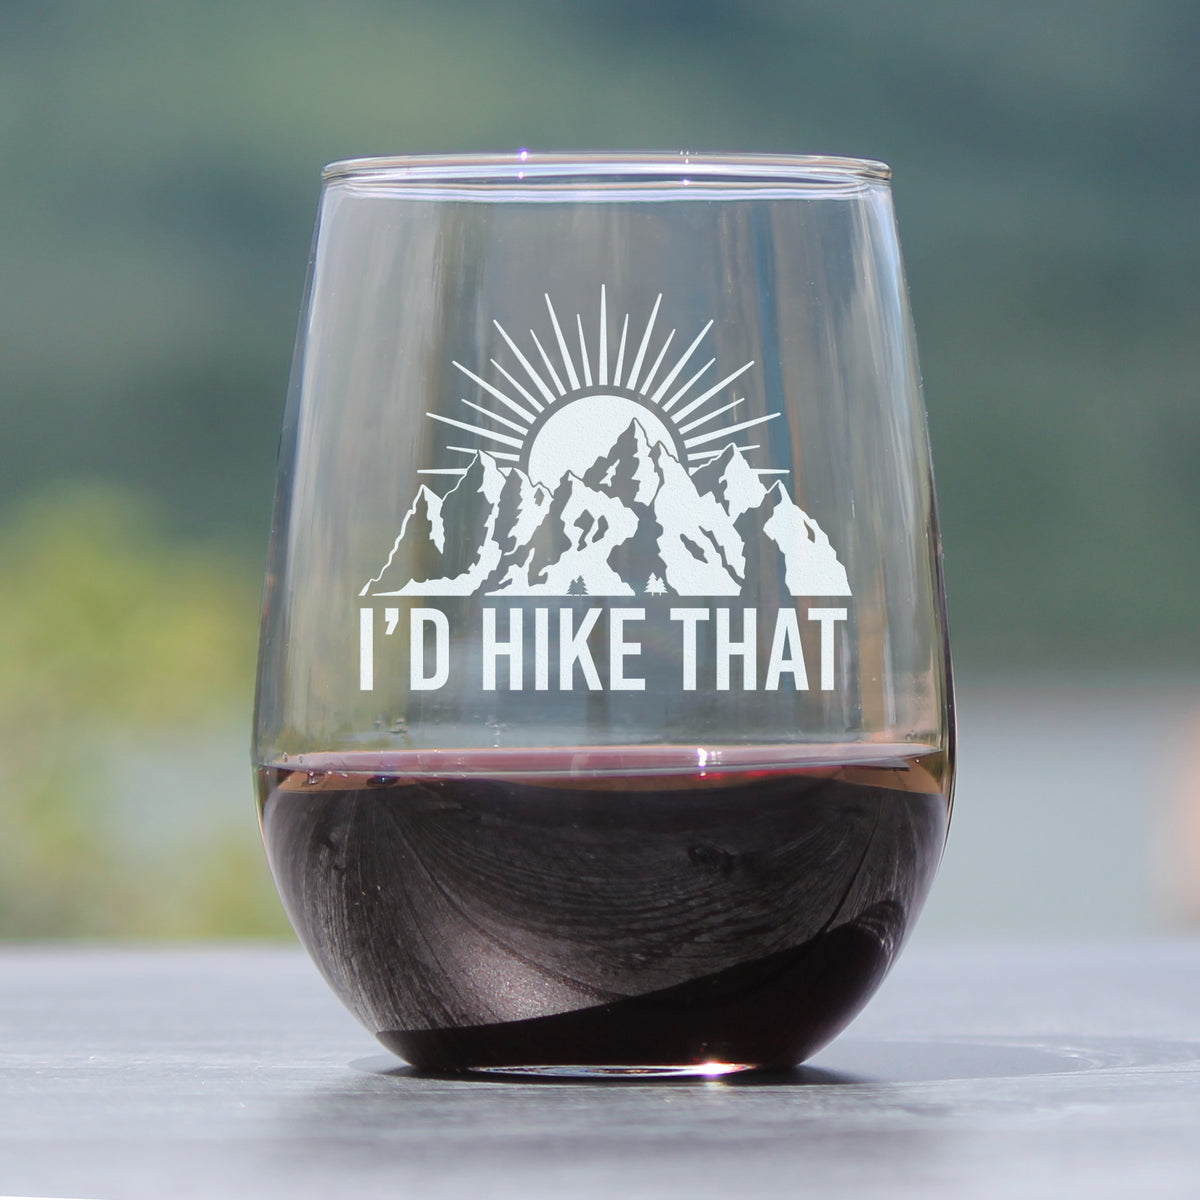 I&#39;d Hike That - Stemless Wine Glass - Cool Hiking Themed Decor and Gifts for Mountain Lovers - Large 17 Oz Glasses